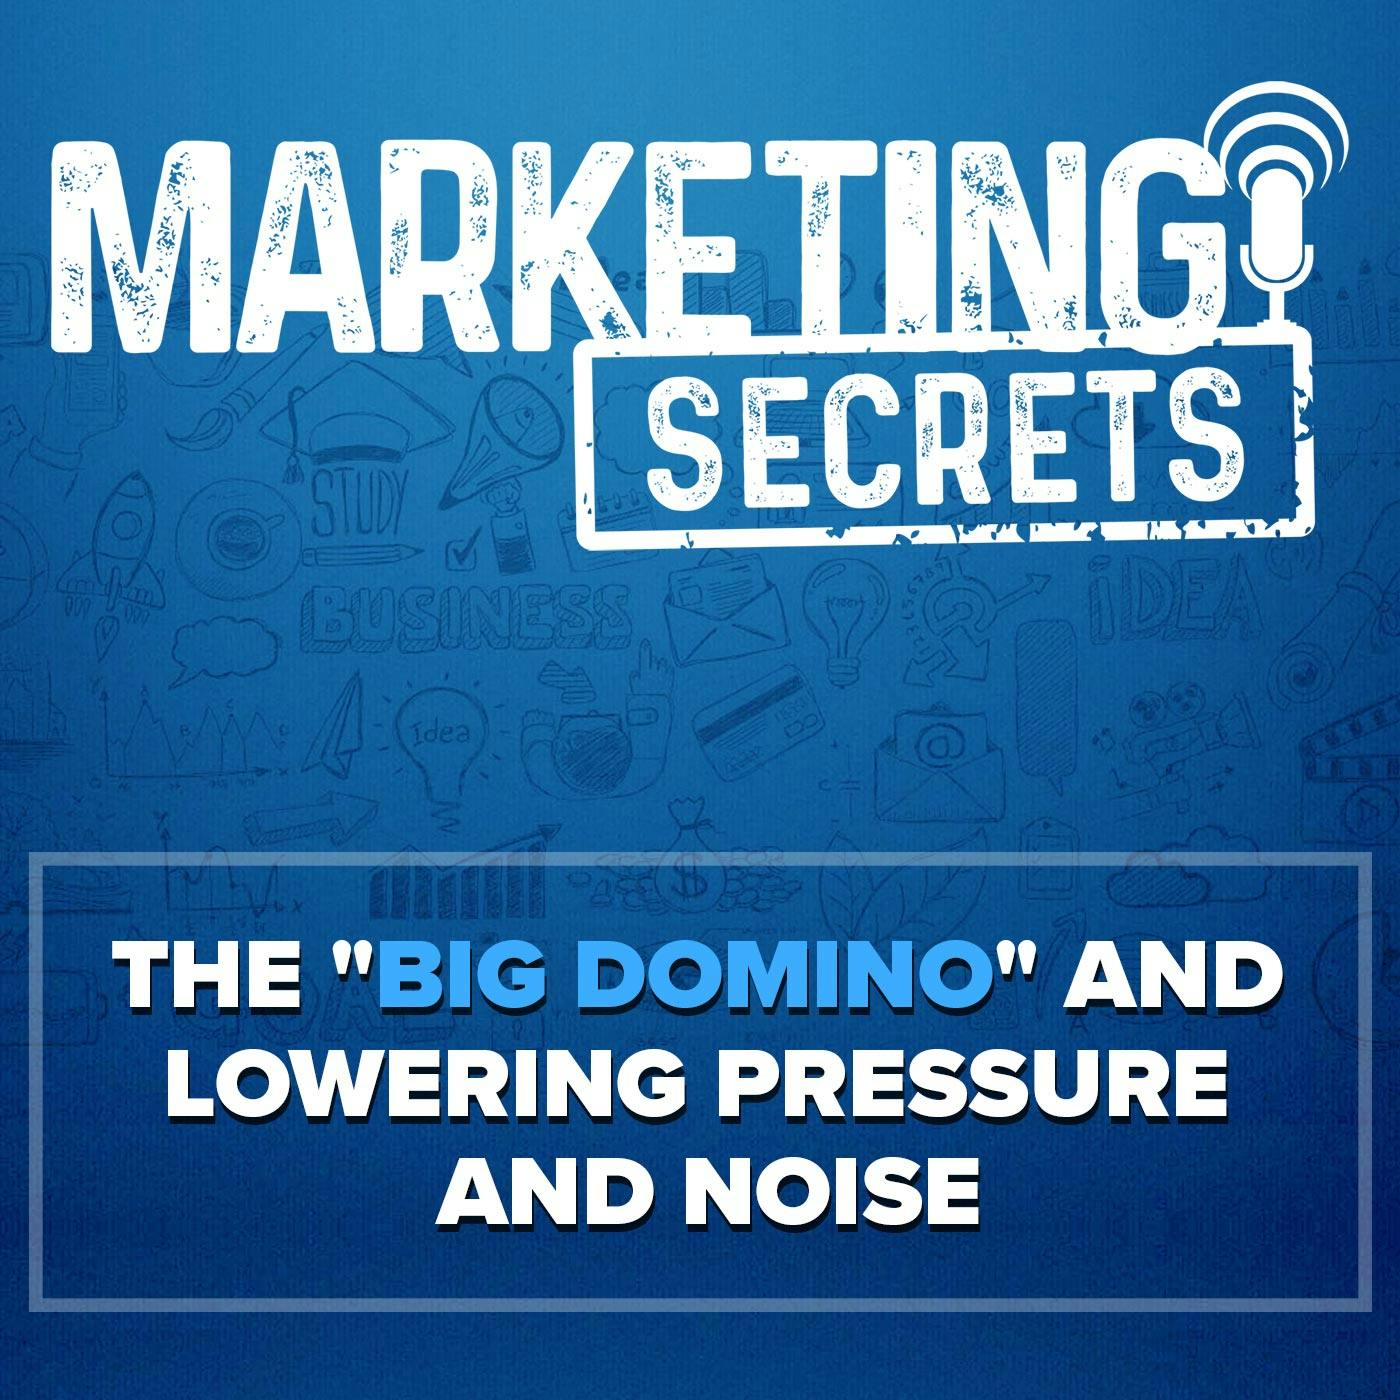 The "Big Domino" and Lowering Pressure and Noise